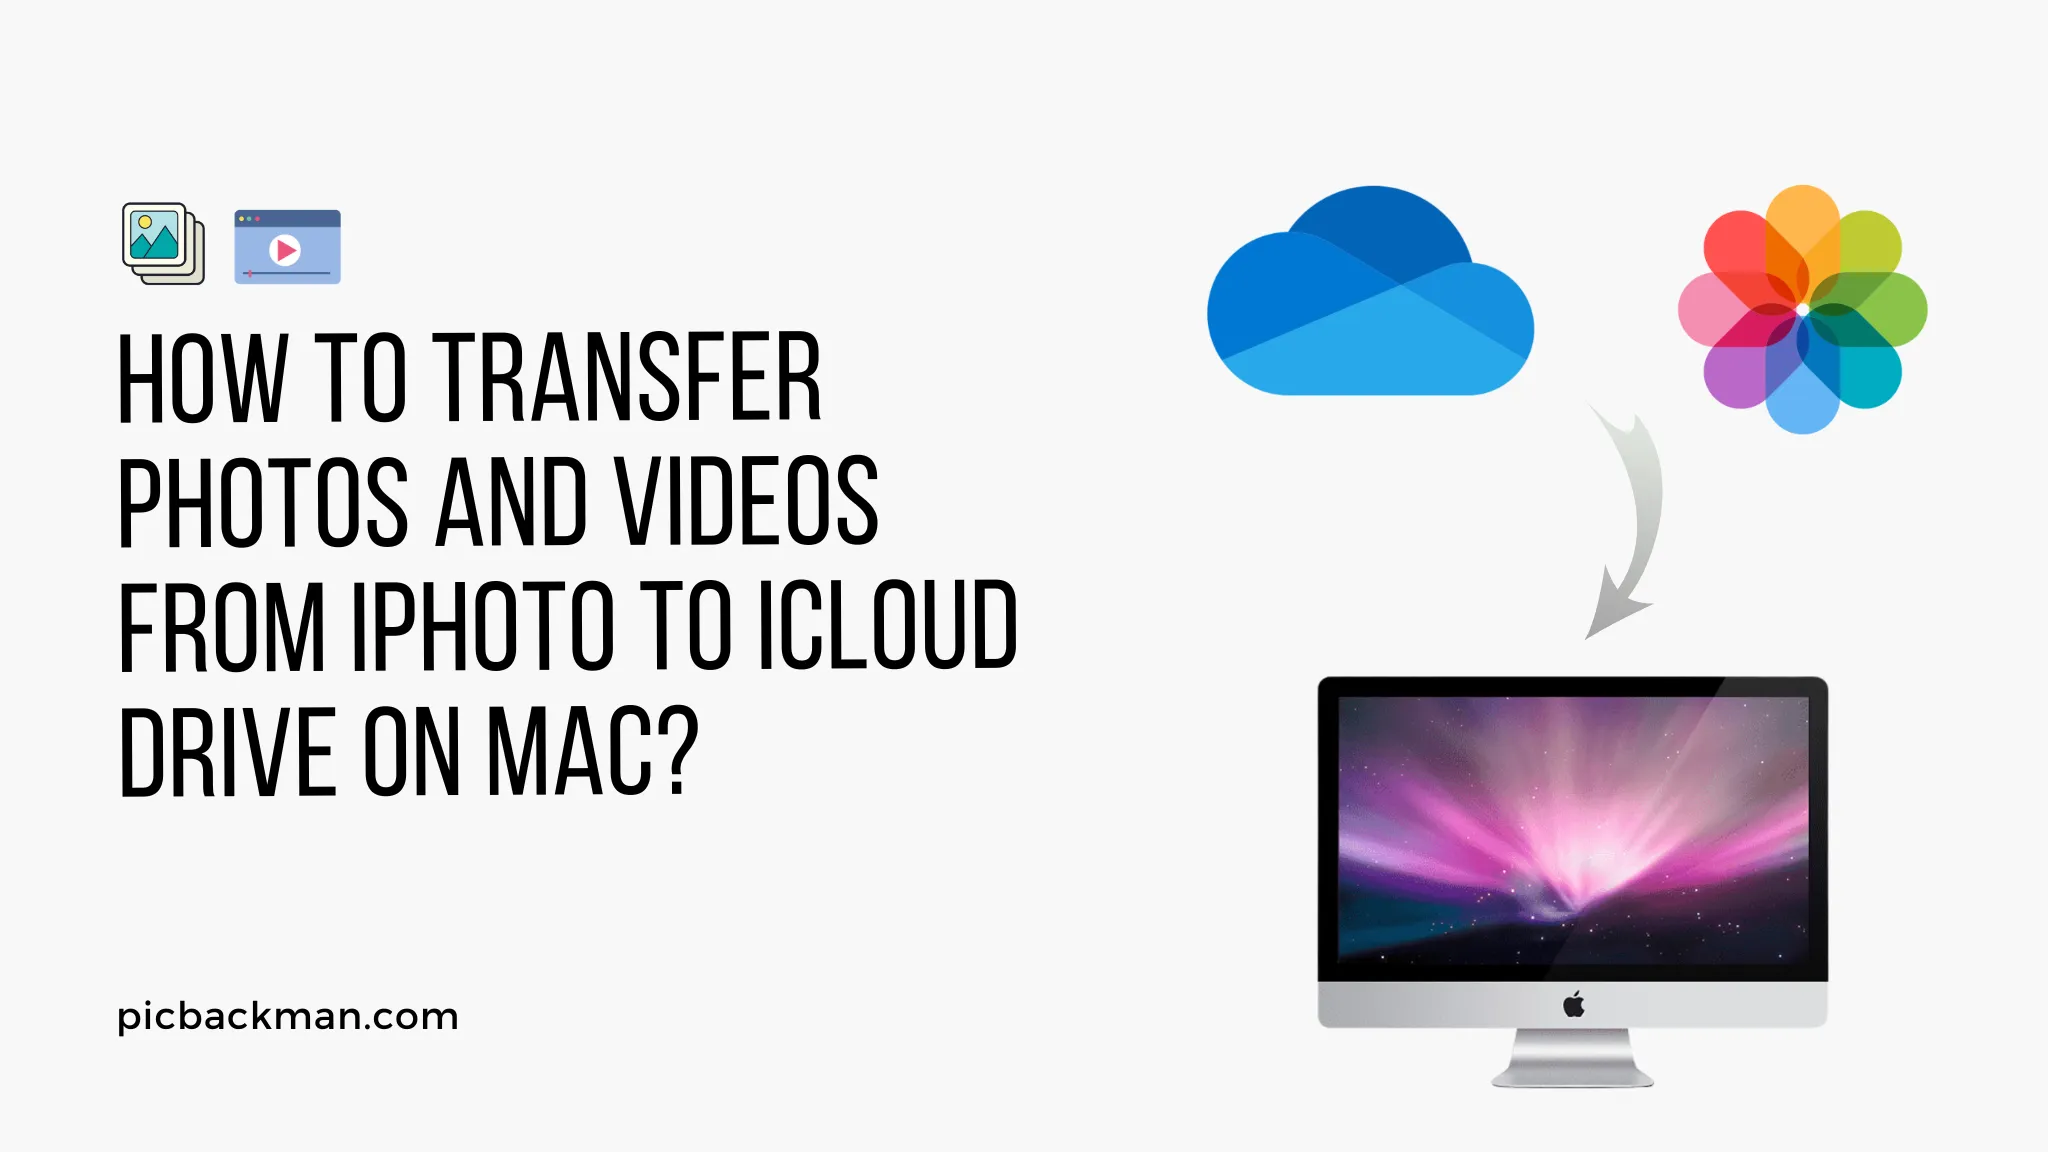 How to Transfer Photos and Videos from iPhoto to iCloud Drive on Mac?